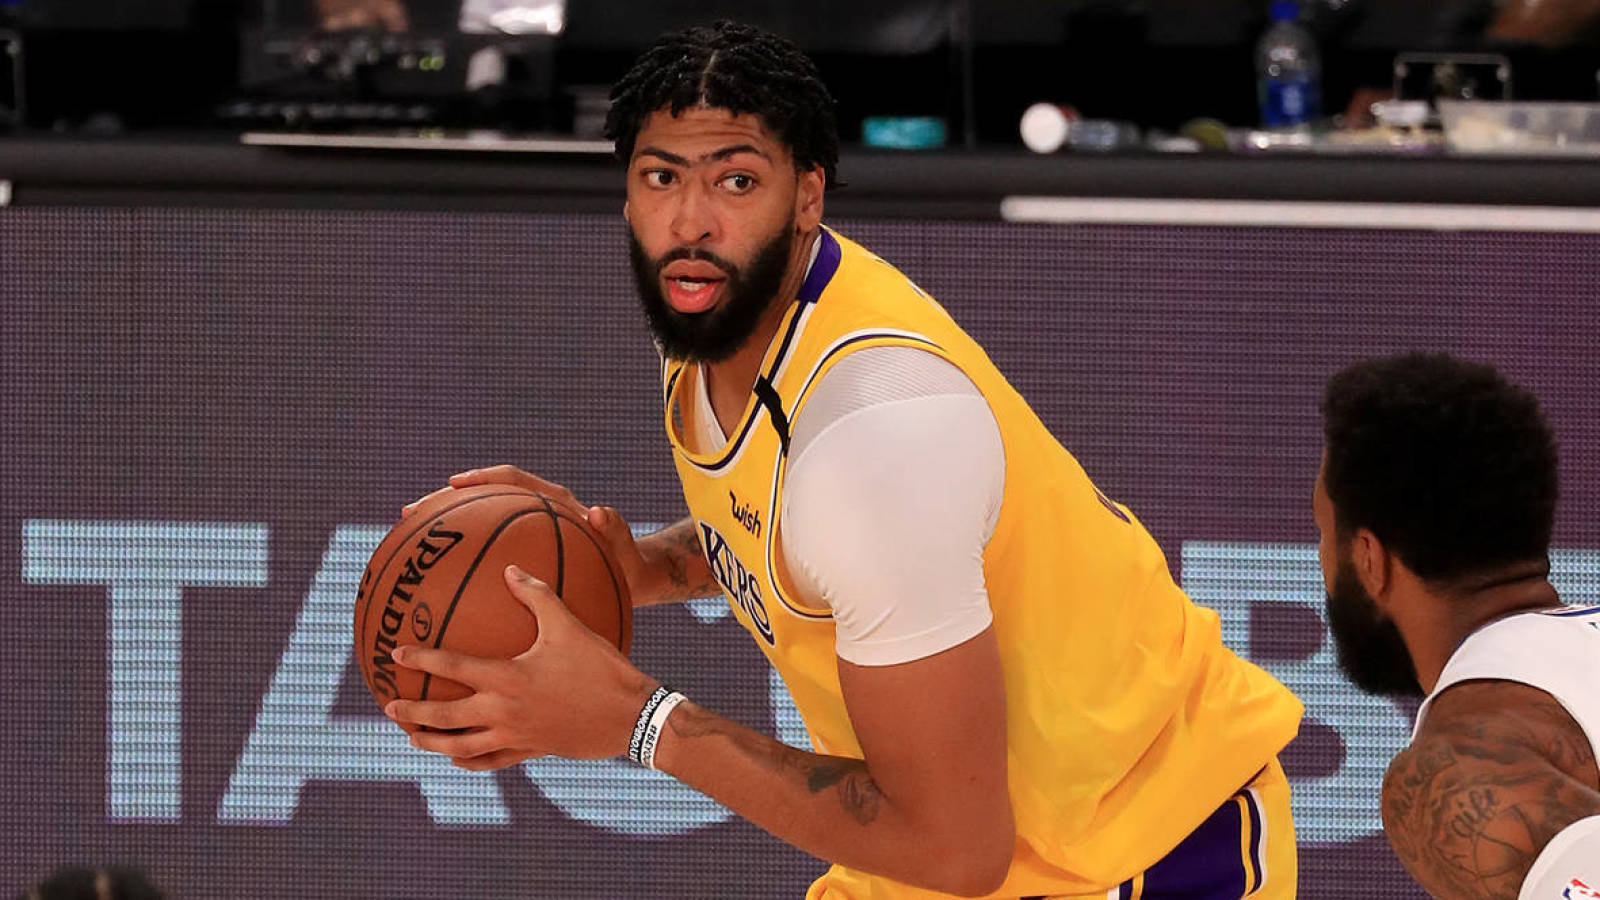 Anthony Davis picture became a meme after Lakers' win | Yardbarker